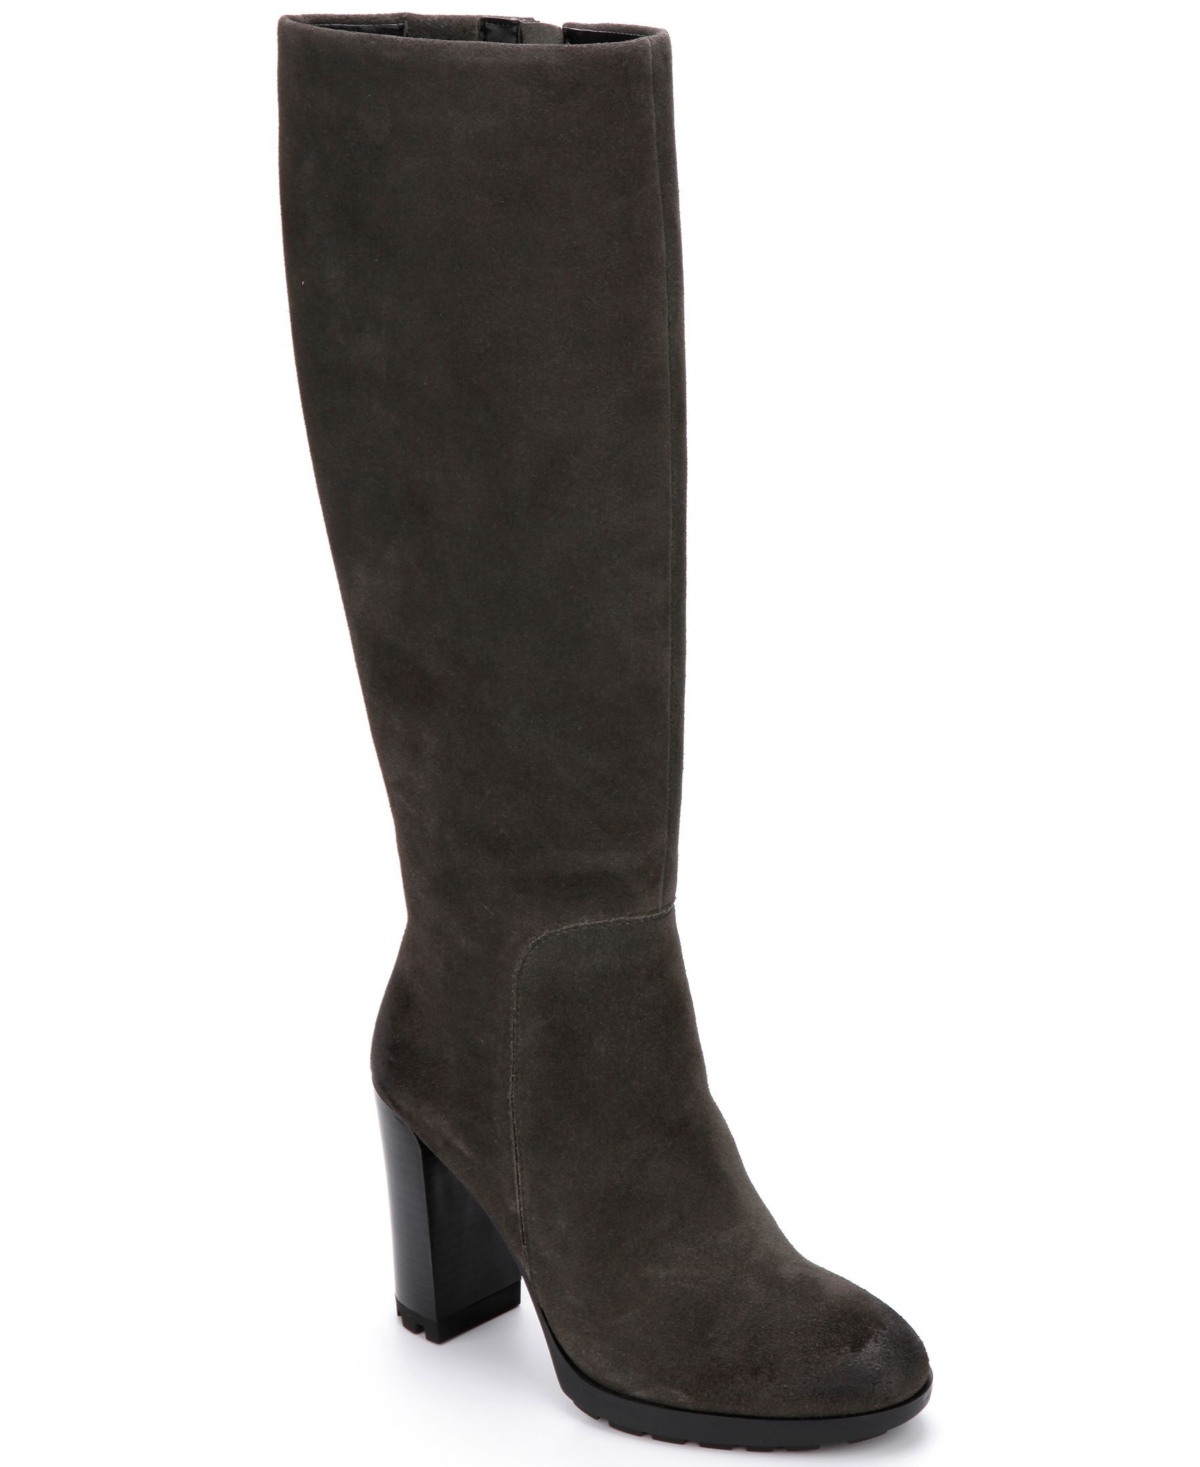 Women's Justin 2.0 Lug Sole Tall Boots - Asphault Leather